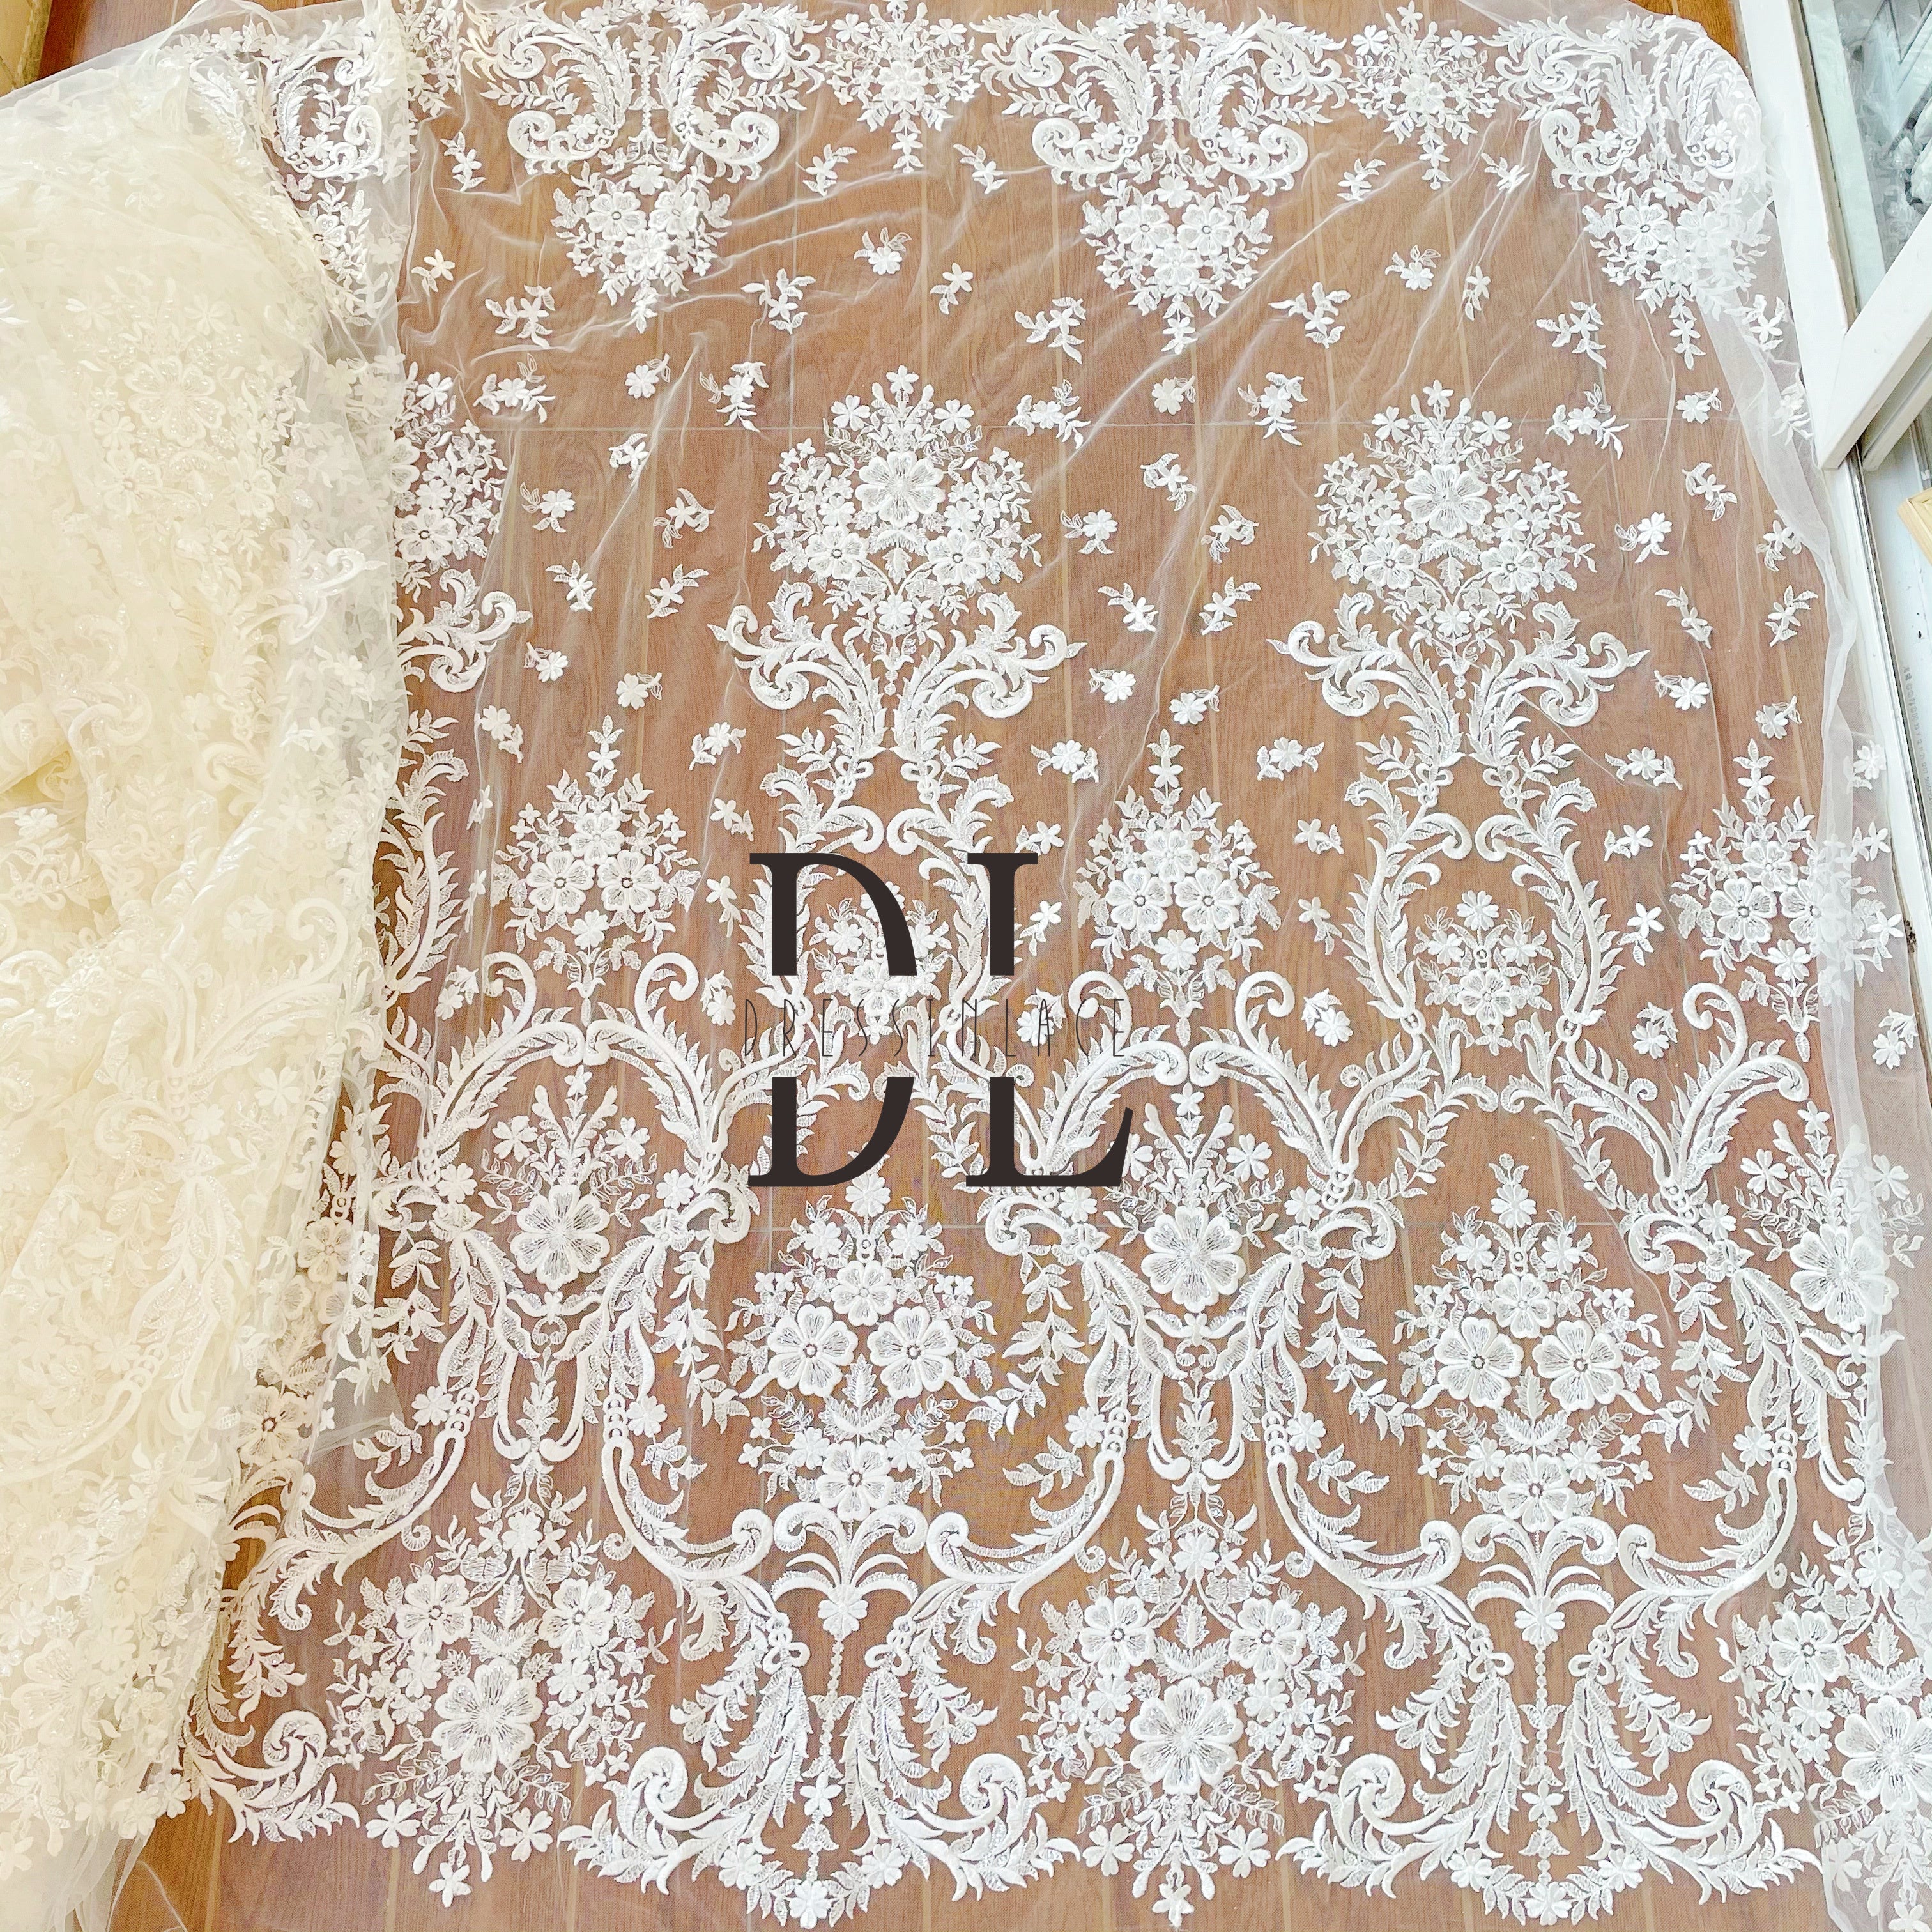 DL130005 Thick Embroidery Lace Fabric for Wedding Dress - Shimmering Transparent Mesh with Trendy Floral Elements and Fluid Lines DL130005